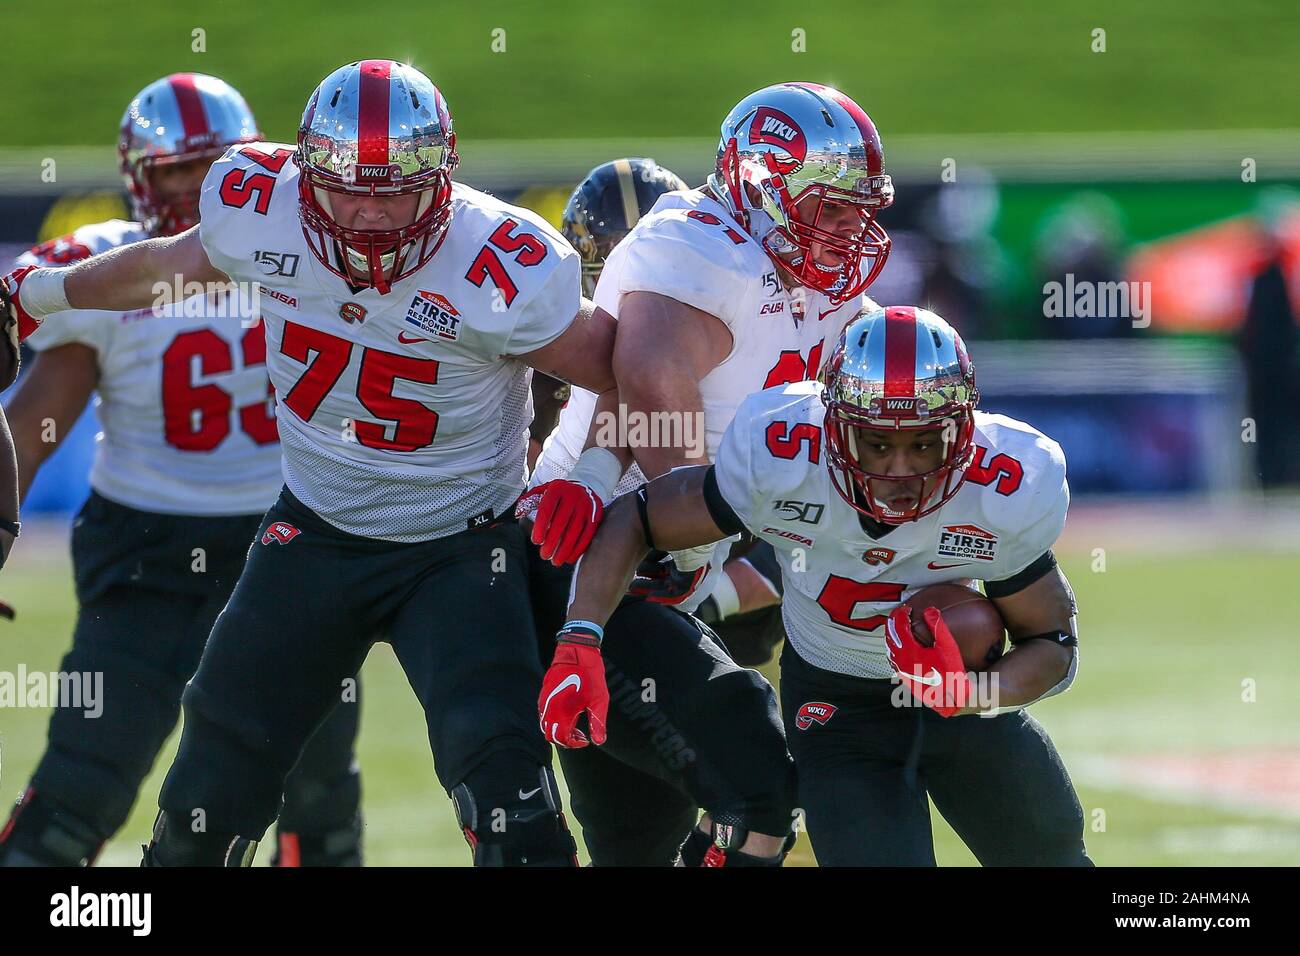 Dallas, Texas, USA. 30th Dec, 2019. Western Kentucky Hilltoppers running back Gaej Walker (5) in action during the Servpro First Responder Bowl game between Western Michigan Broncos and the Western Kentucky Hilltoppers at the gerald Ford Stadiuml Stadium in Dallas, Texas. Credit: Dan Wozniak/ZUMA Wire/Alamy Live News Stock Photo